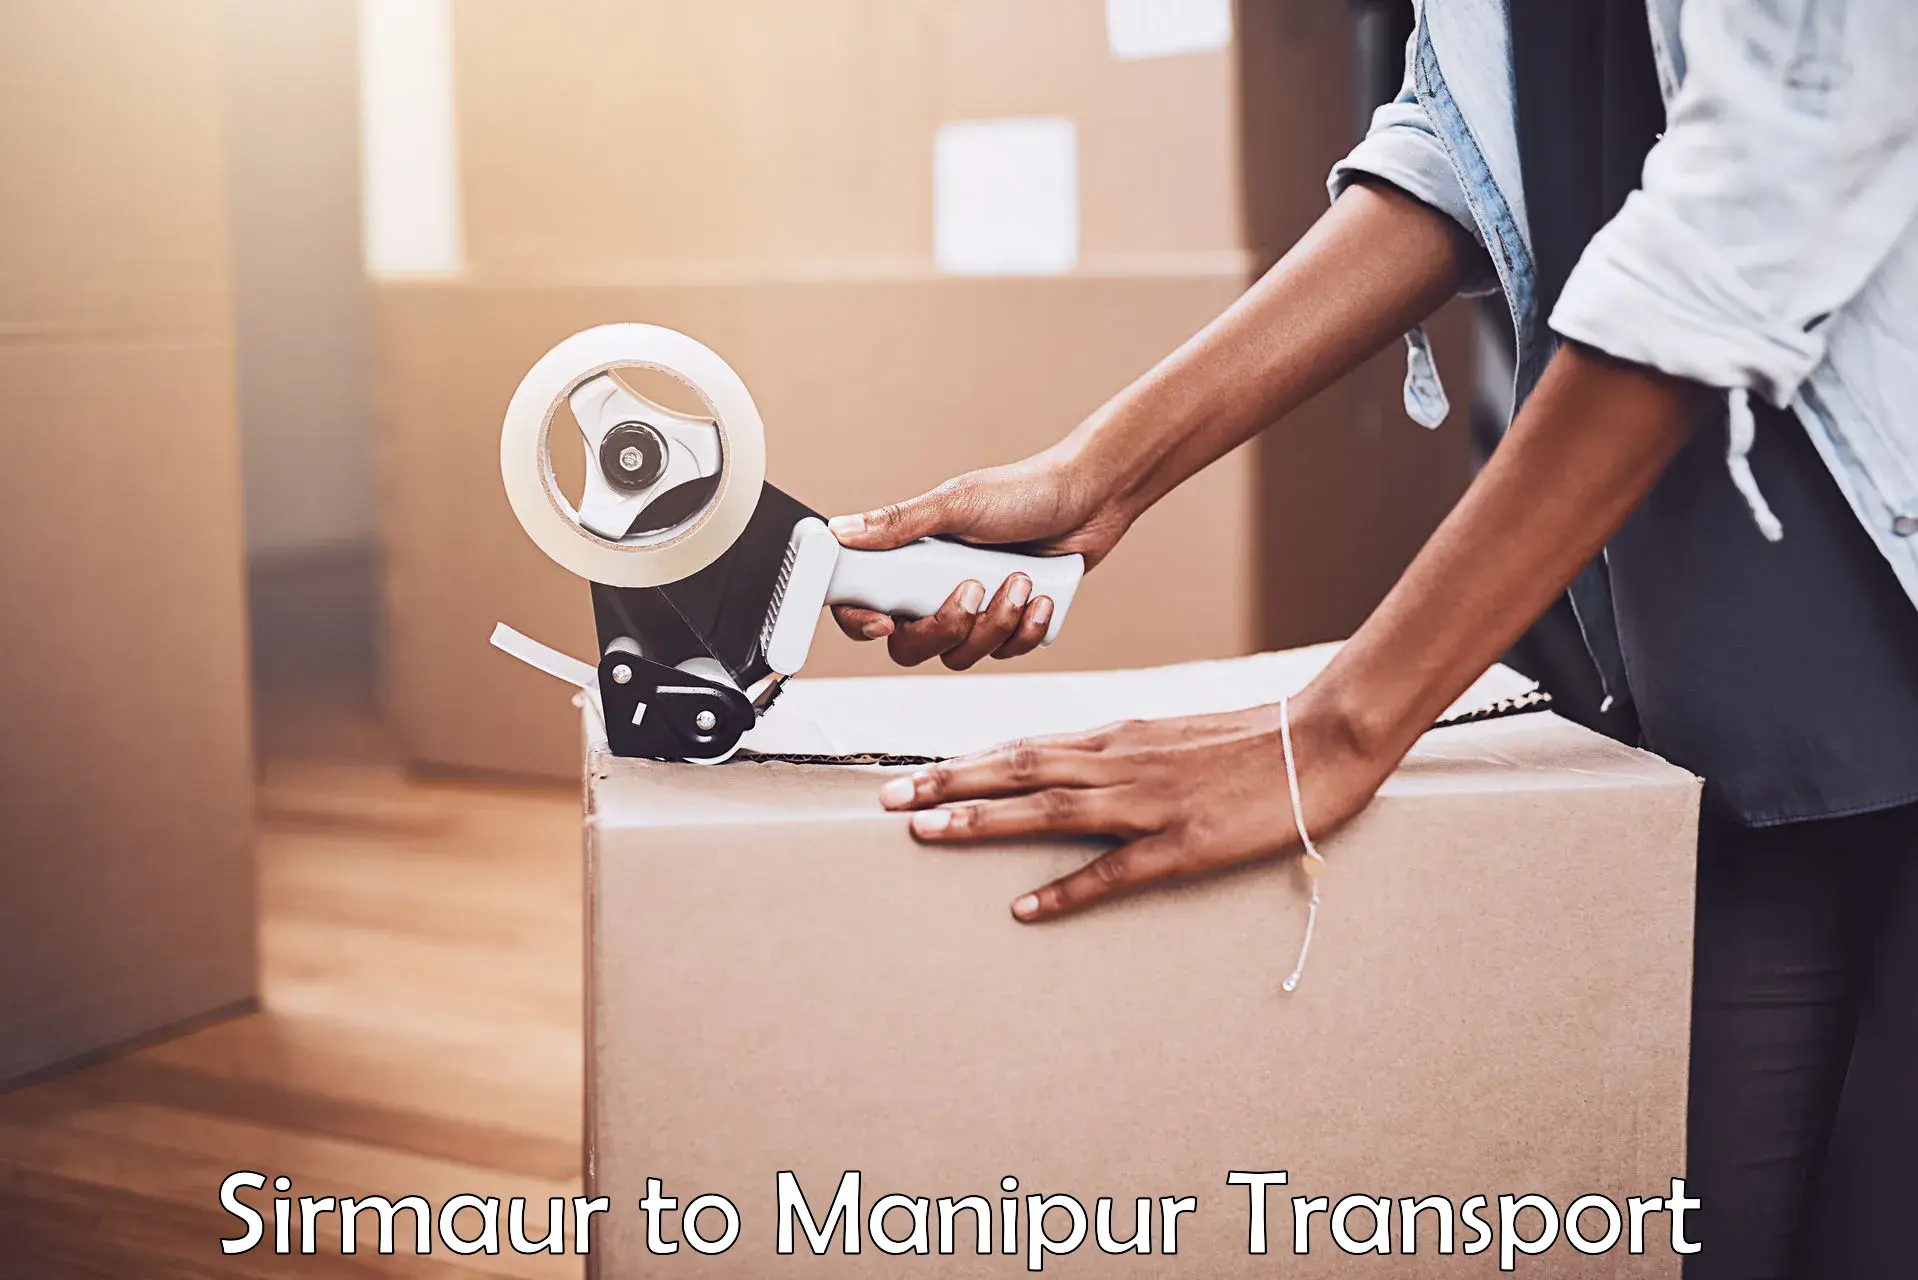 Daily transport service Sirmaur to Manipur